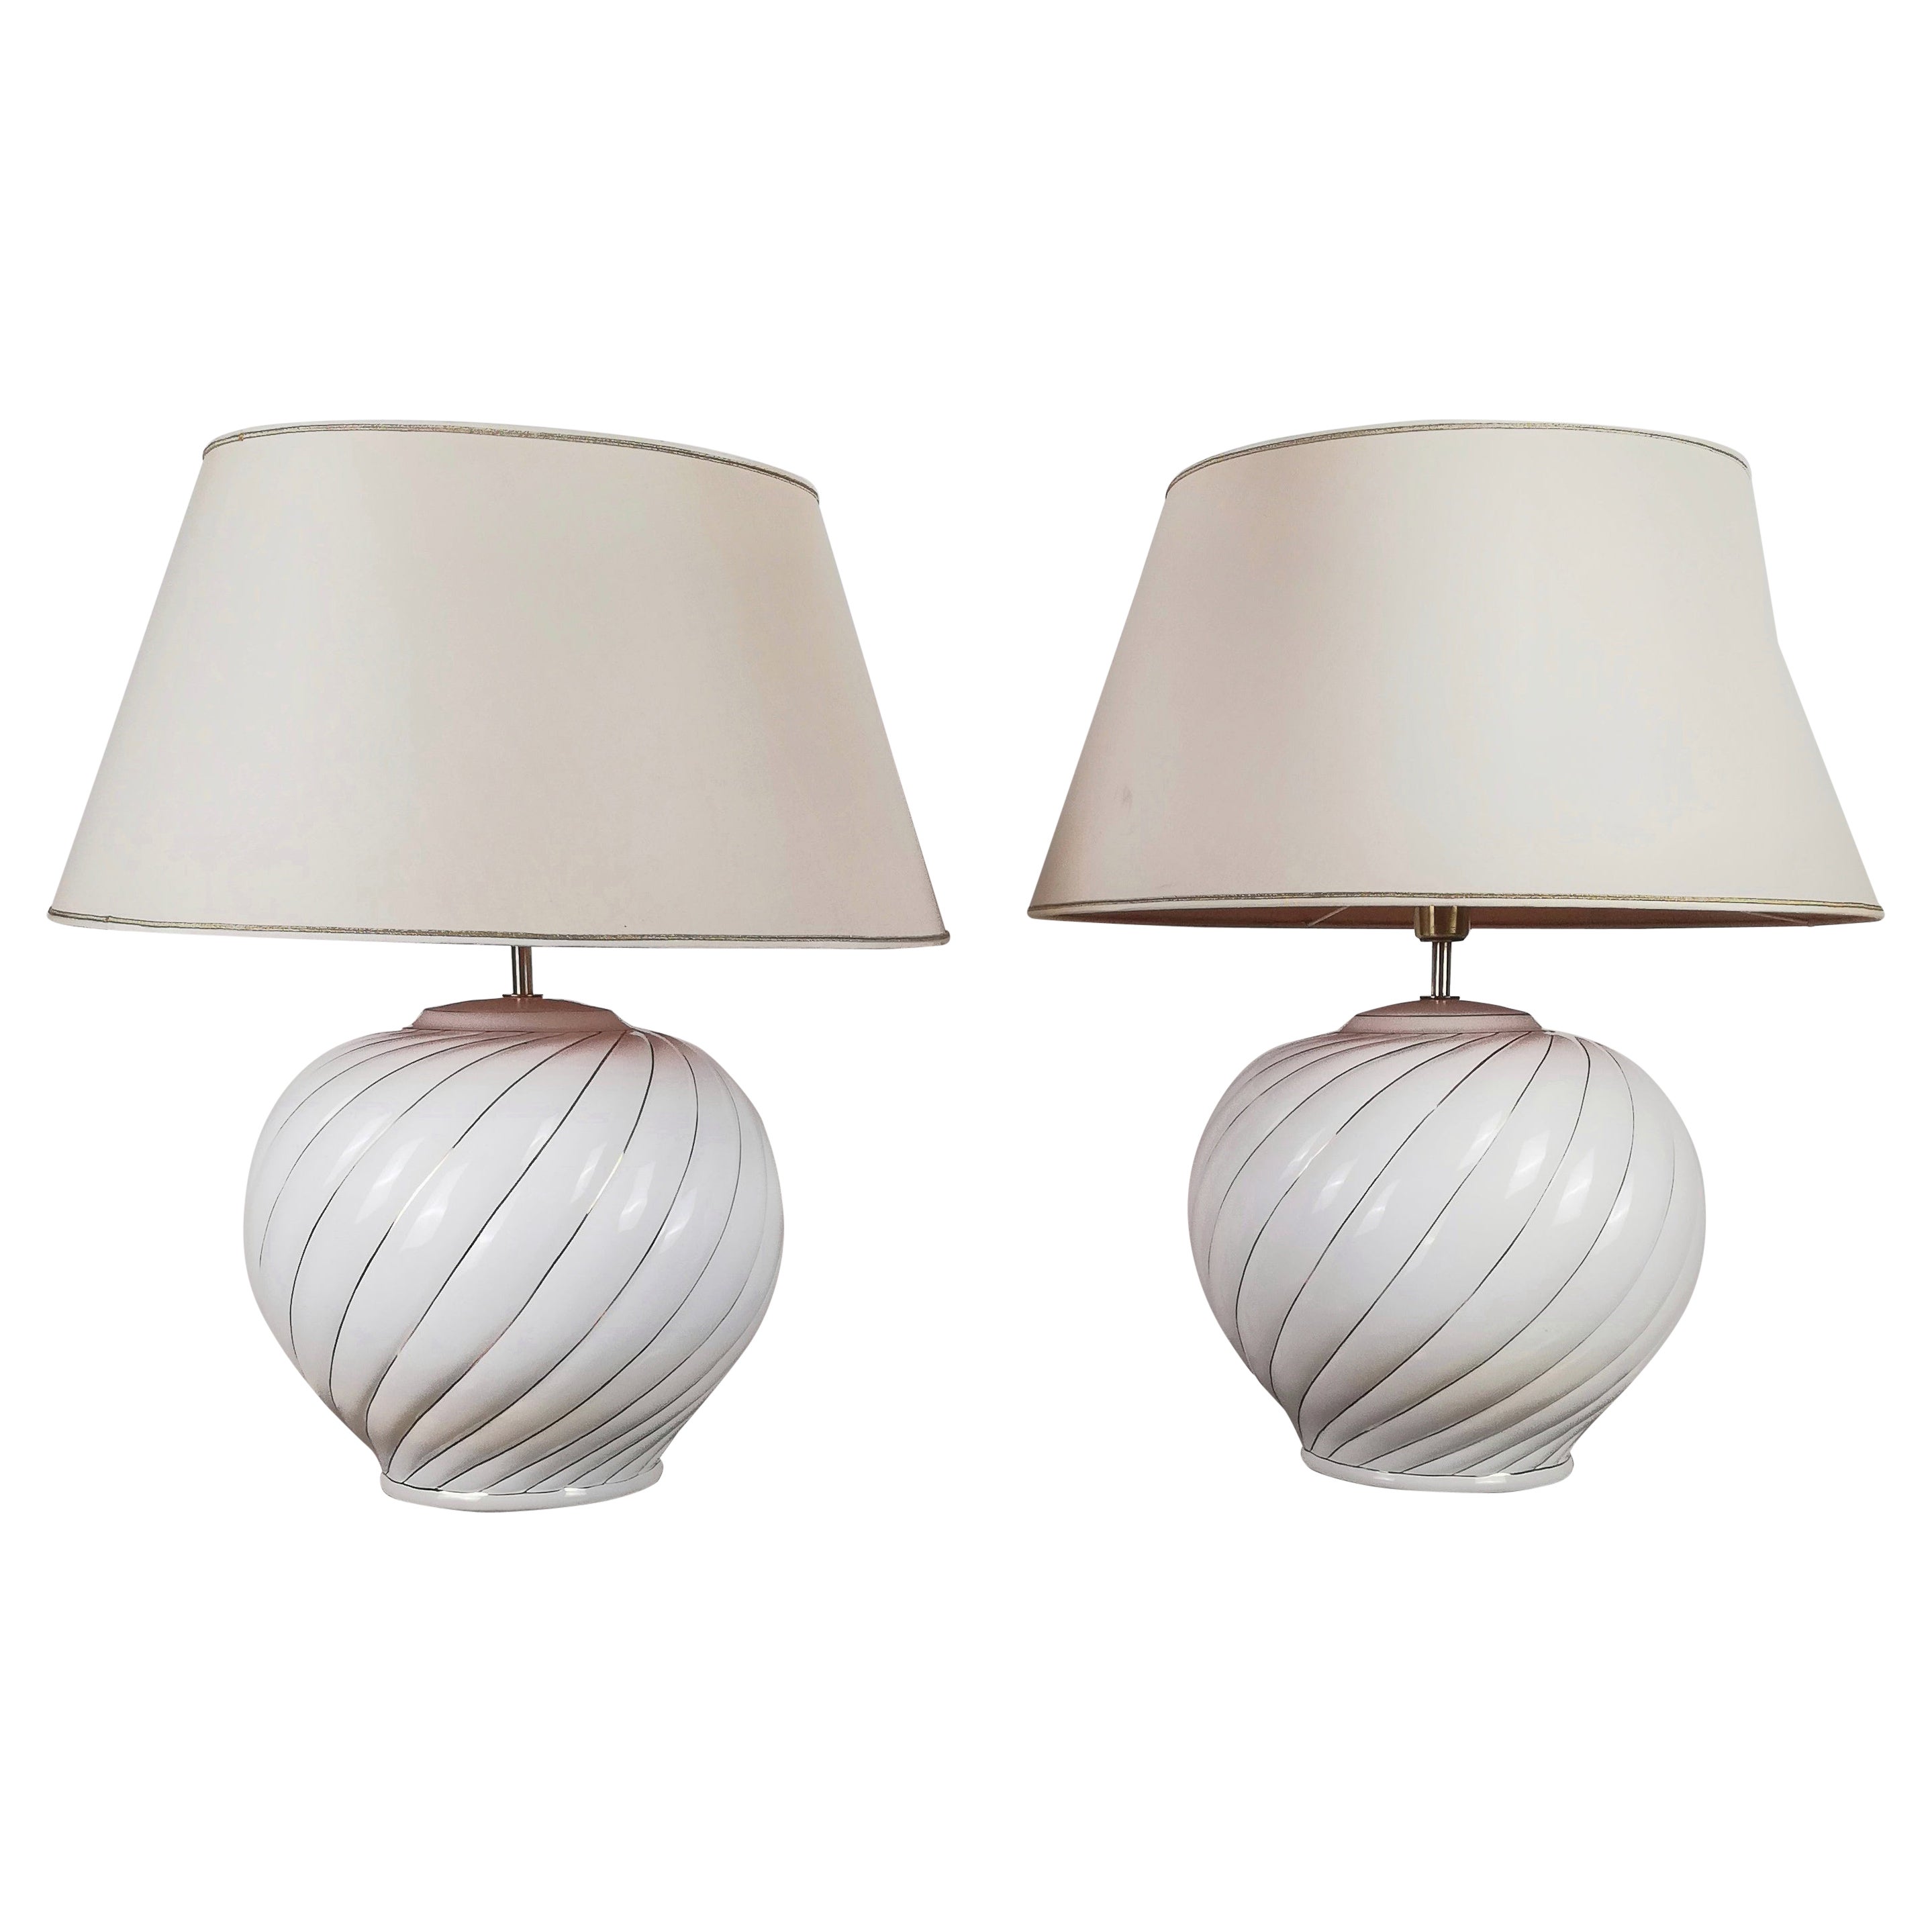 Set of 2 Table Lamps by Tommaso Barbi Made in White and Gold Glazed Ceramic